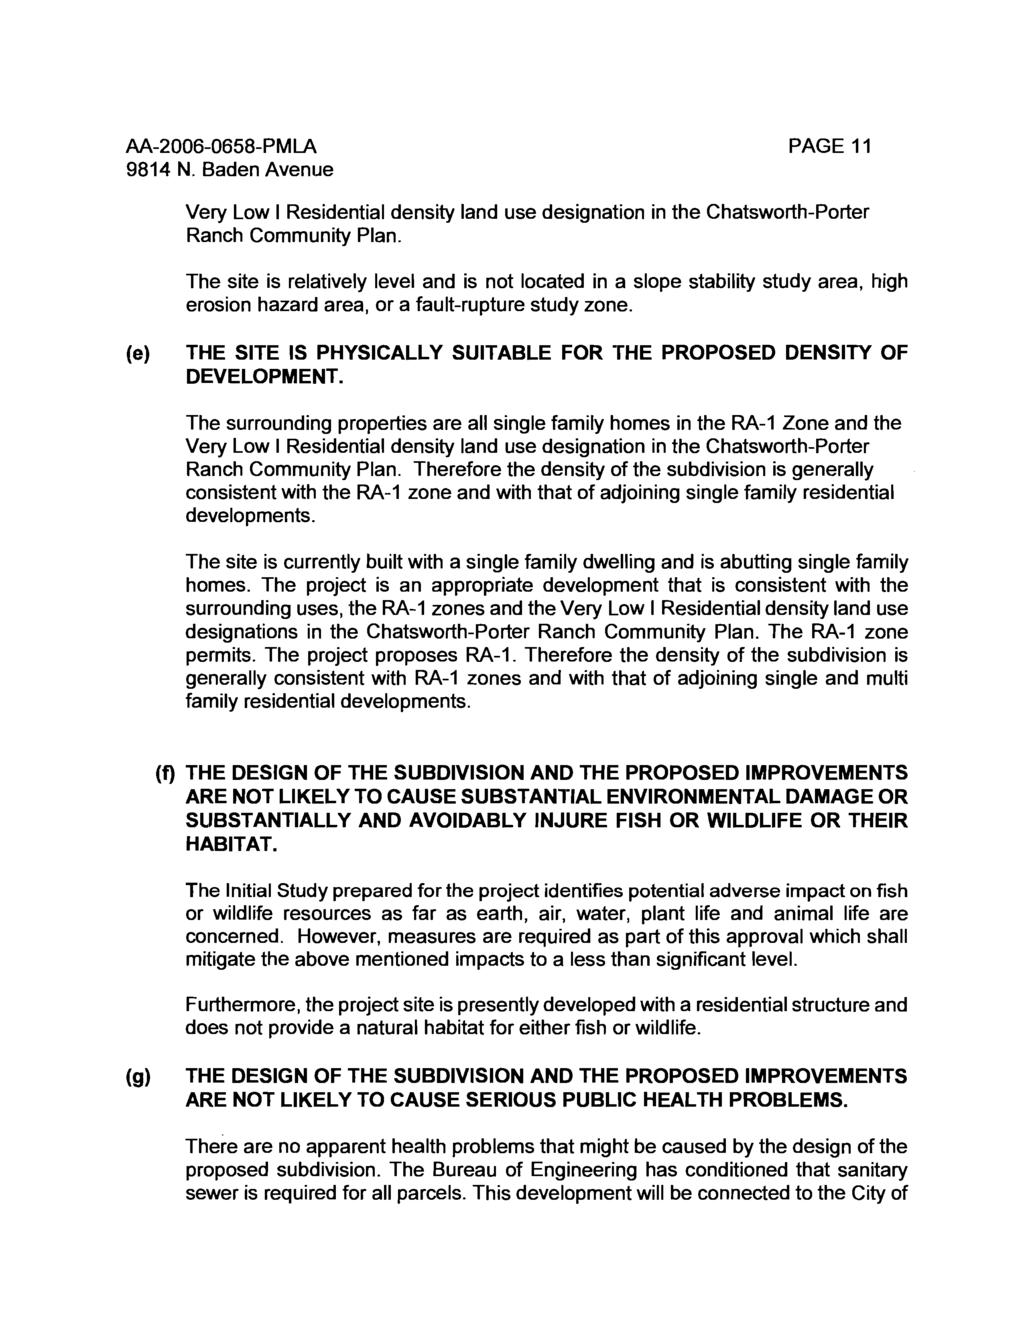 PAGE 11 Very Low I Residential density land use designation in the Chatsworth-Porter Ranch Community Plan.